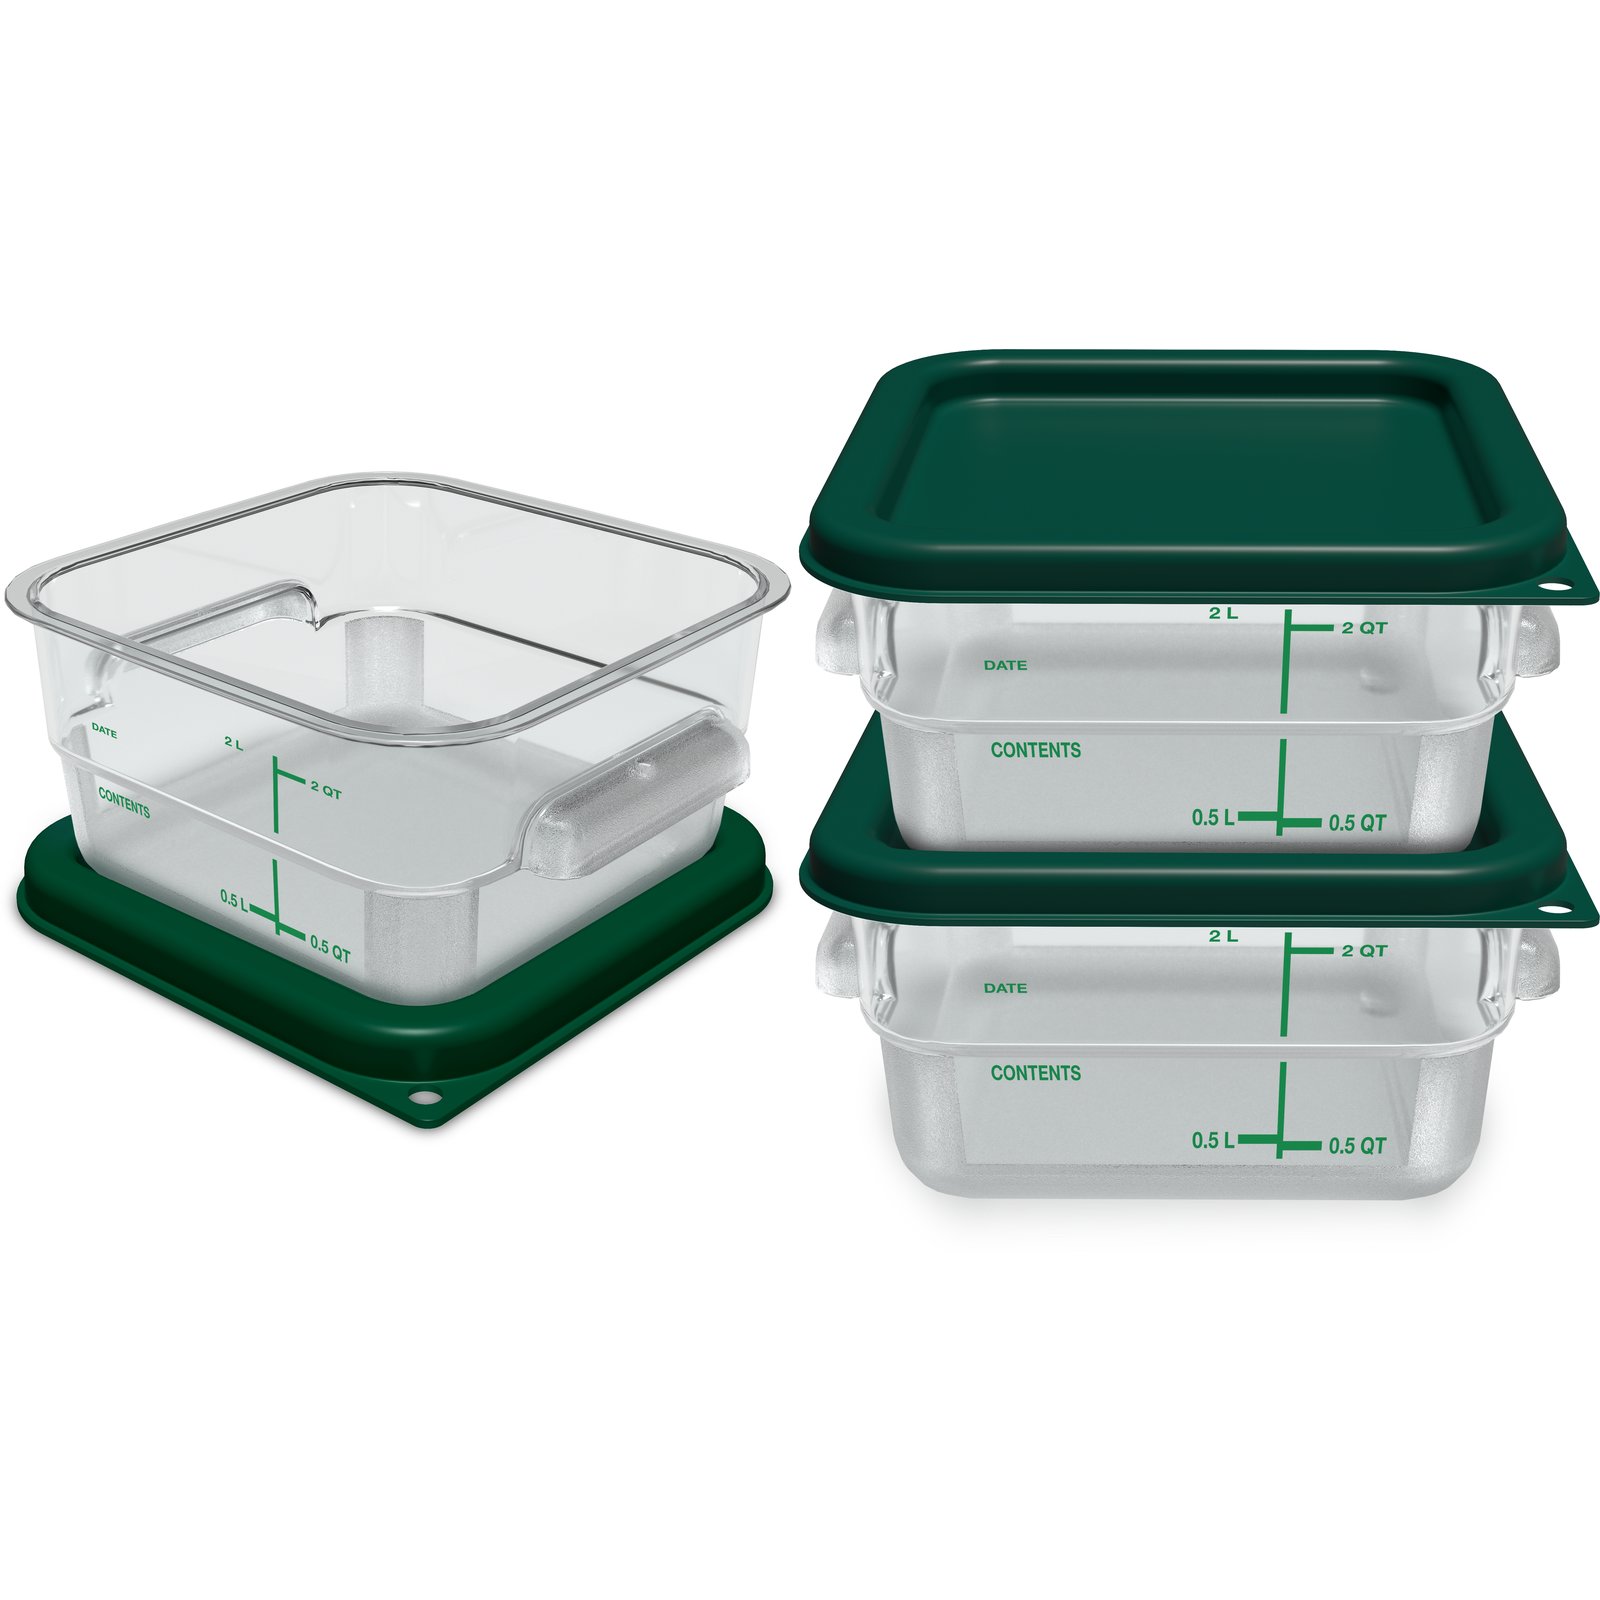 2 qt. Clear Plastic Square Food Storage Container